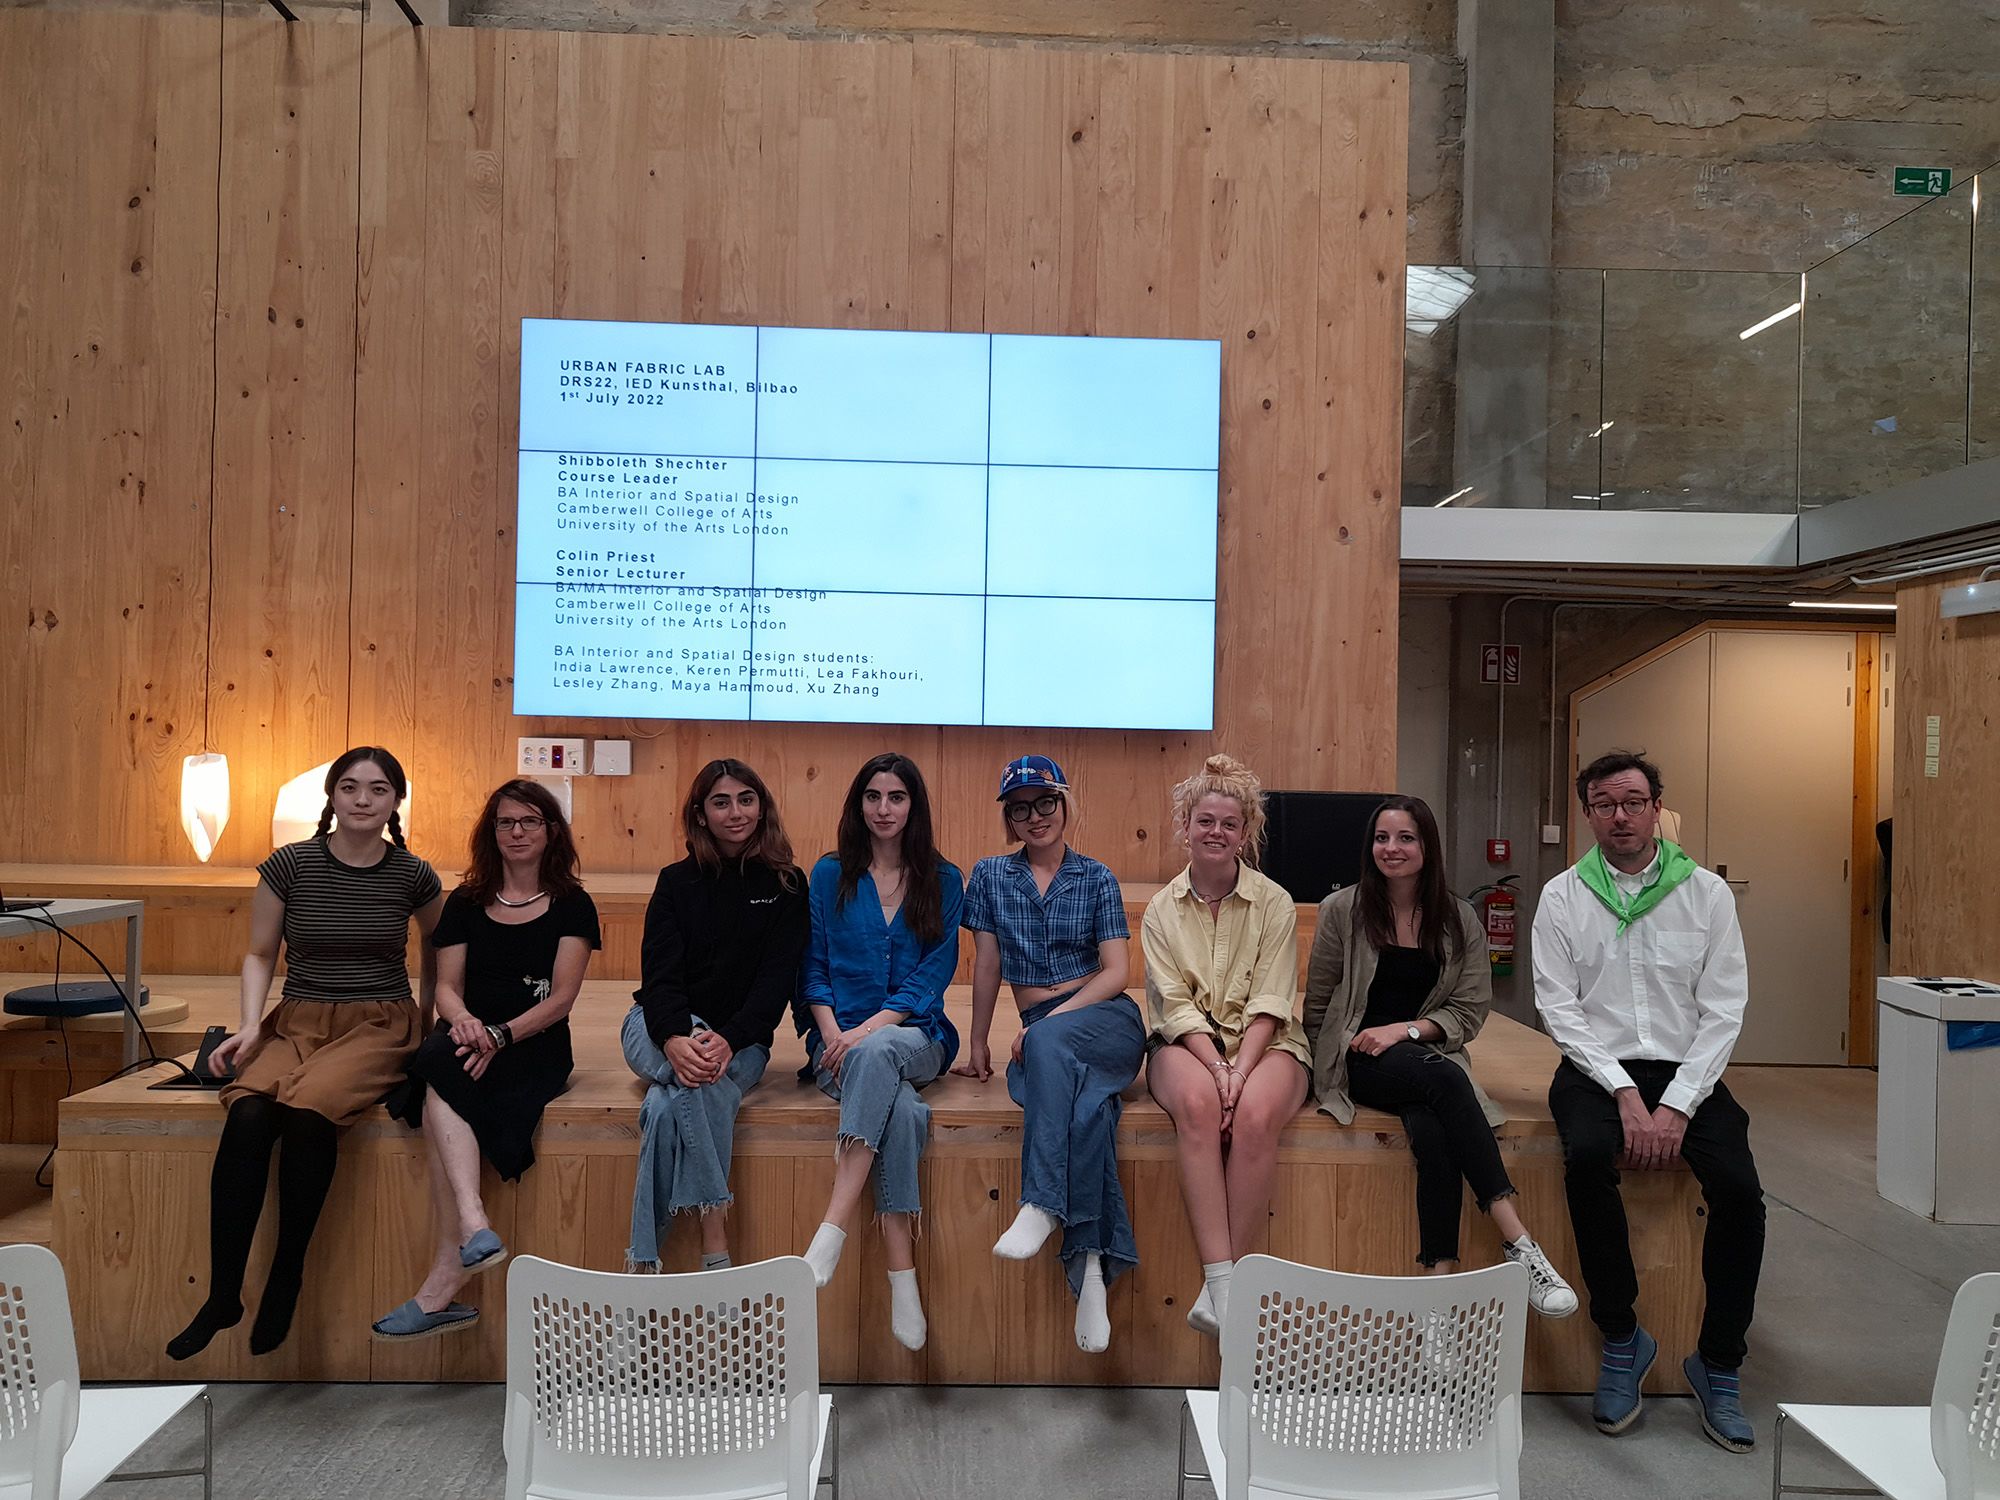 8 people sit on the edge of a wooden stage. They are all facing forward looking towards the camera. Behind them a large screen with the title ‘”Urban Fabric Lab” DRS22, IED Kunsthal, Bilbao, 1st July 2022’. In front of them is a row of empty chairs.